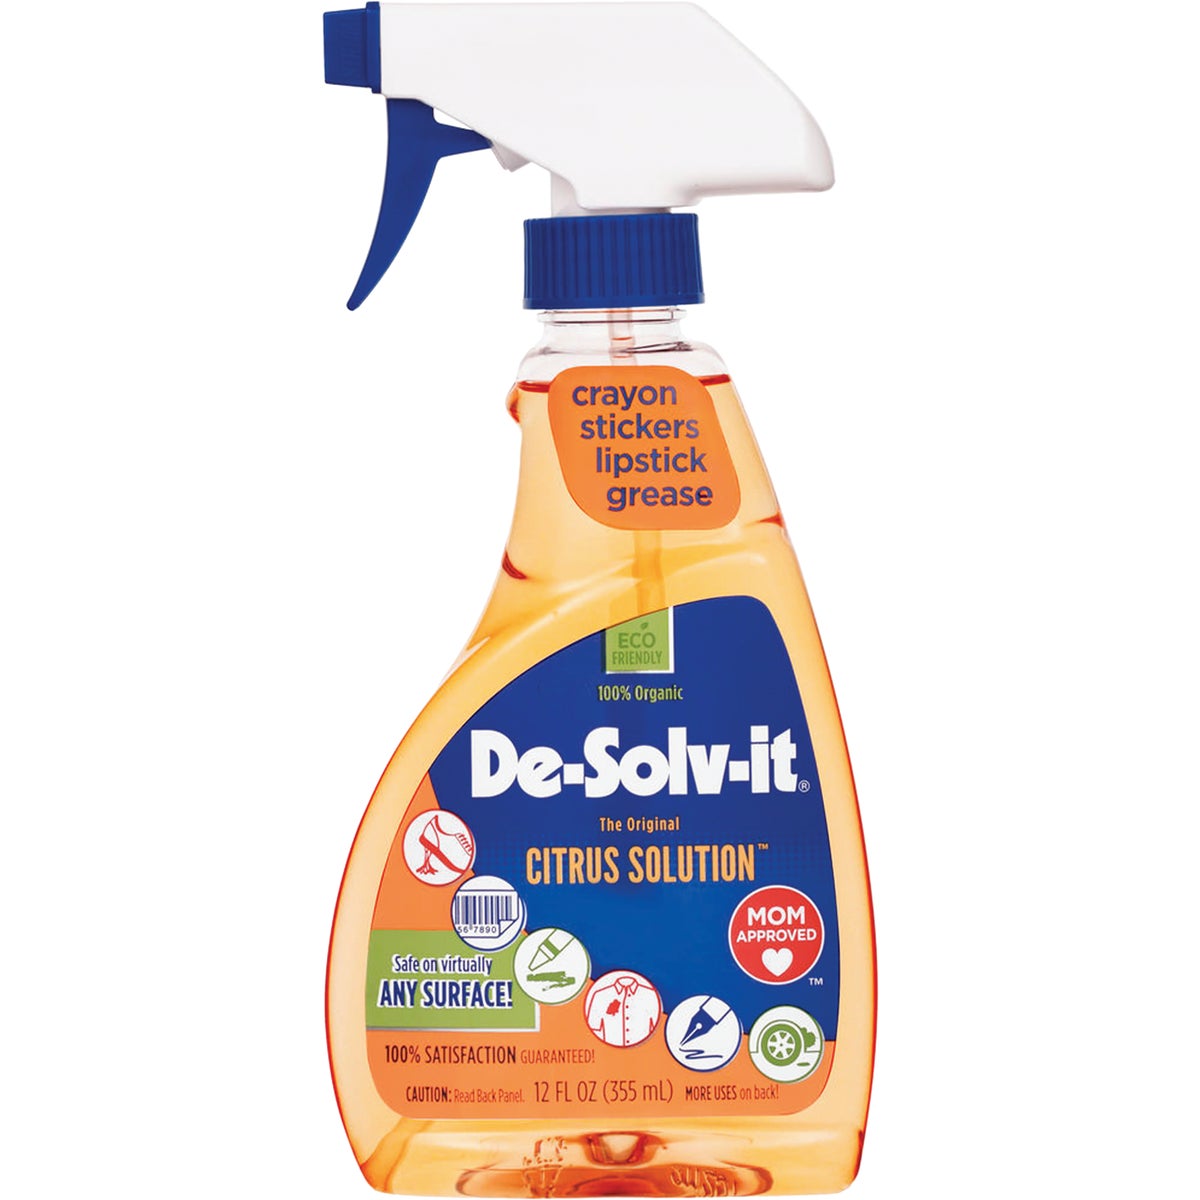 De-Solv-it 12 Oz. Household Cleaner Adhesive Remover